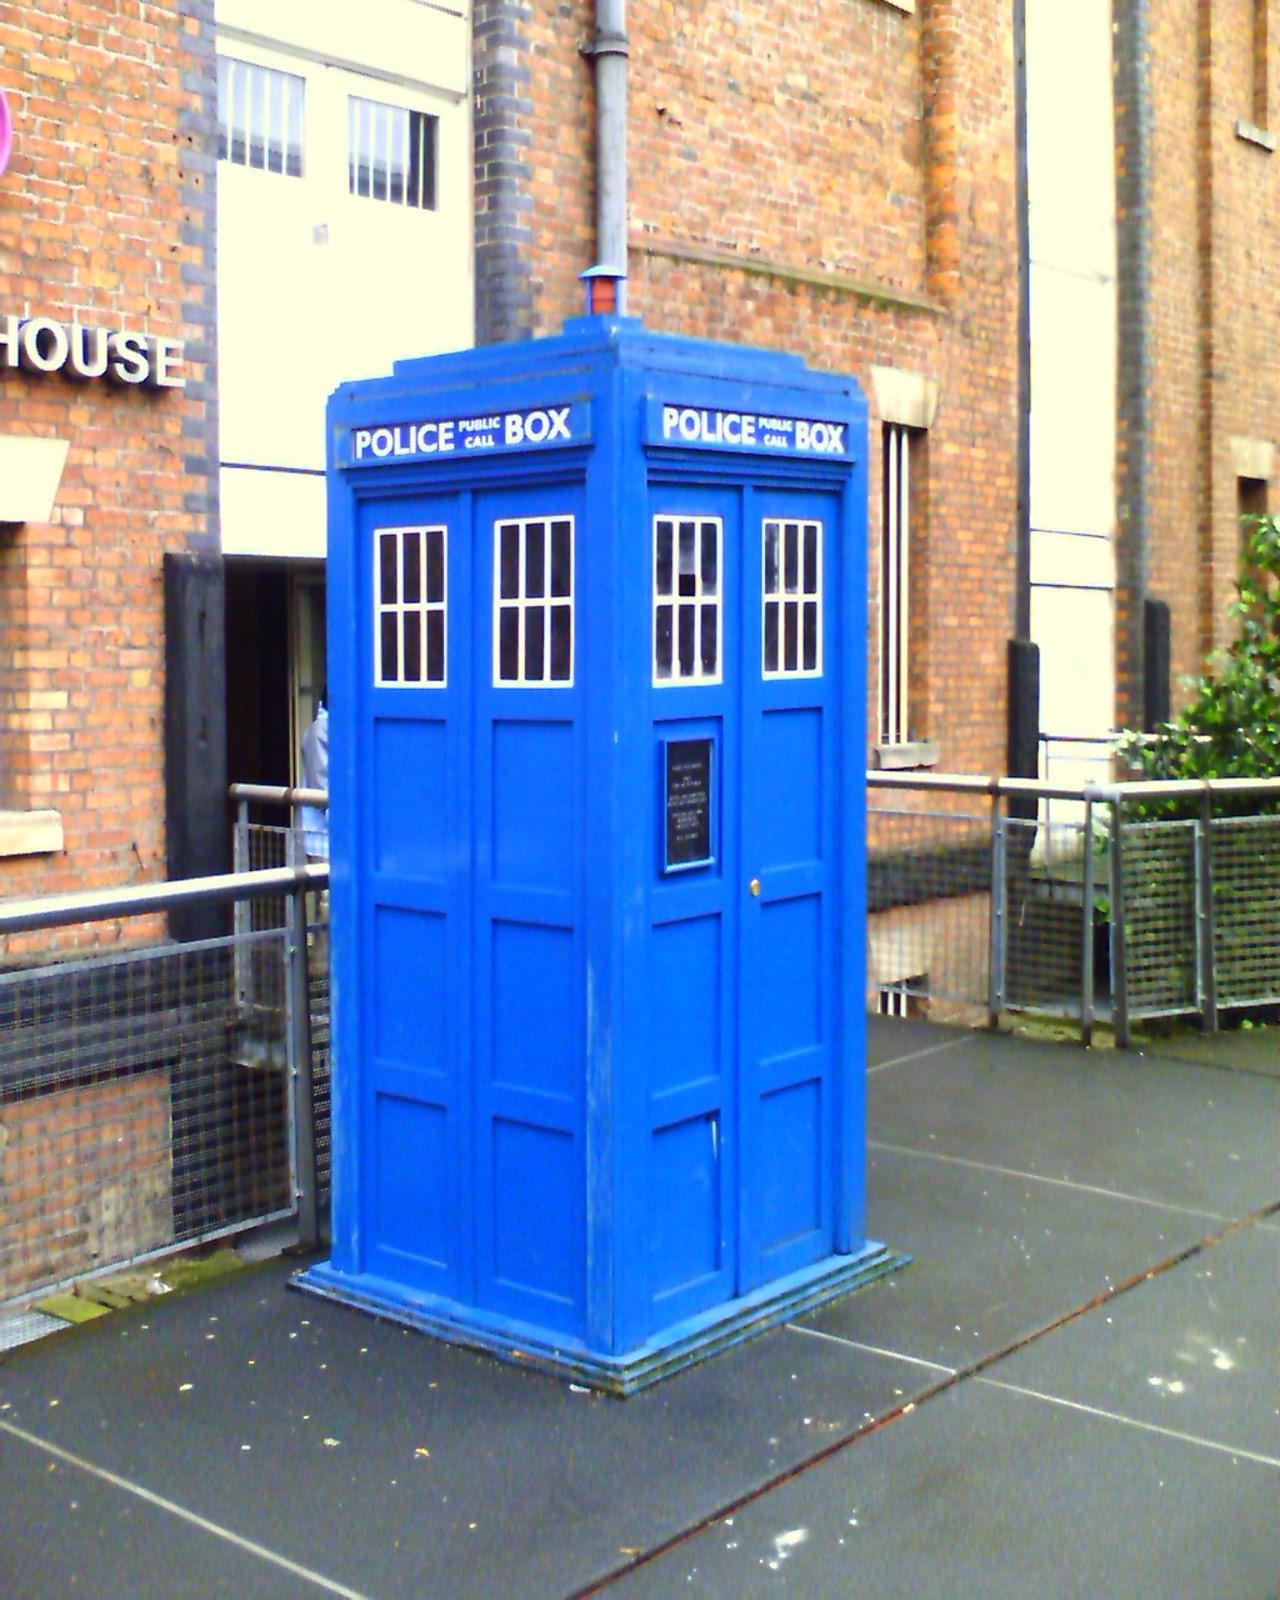 Dr Who's Home